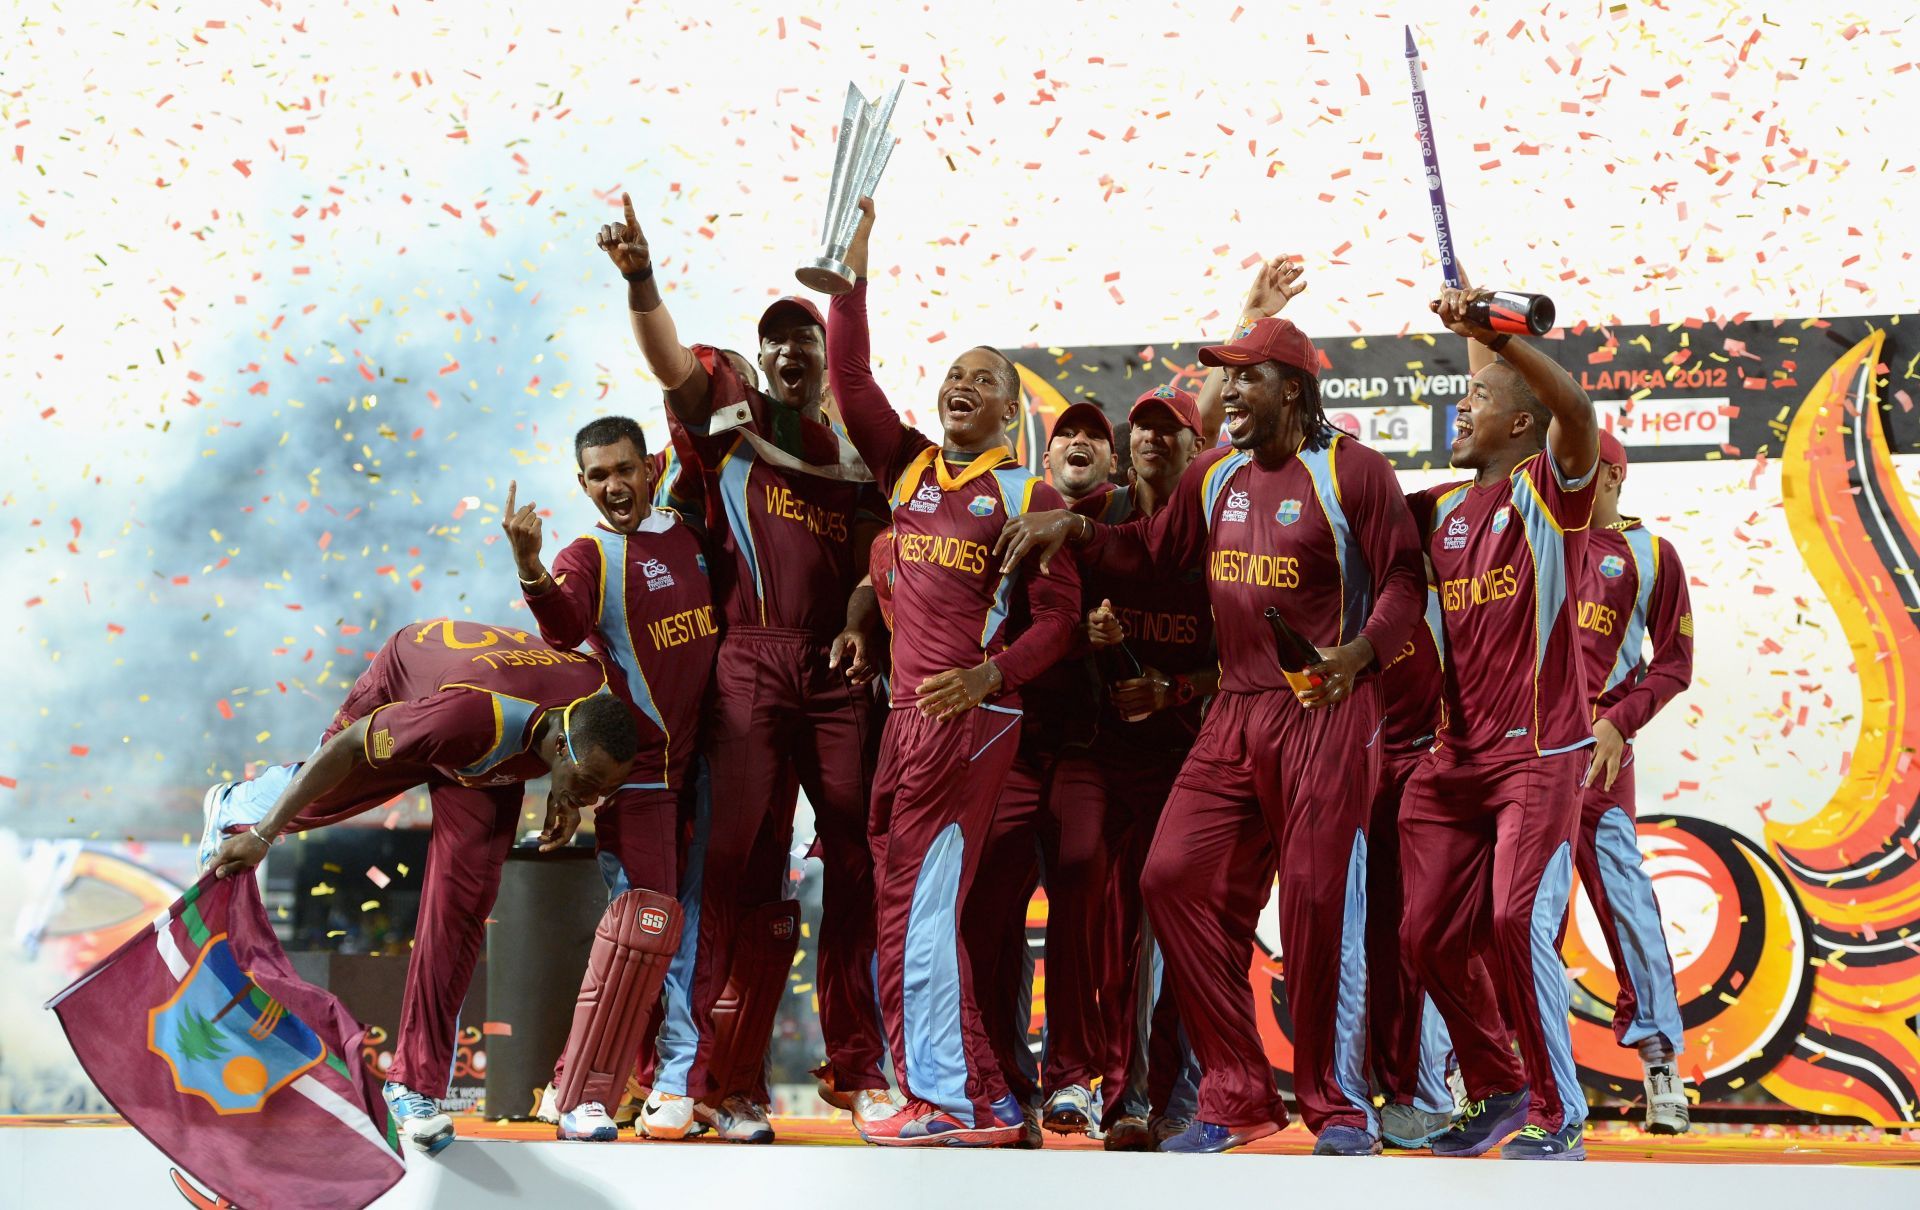 West Indies team with the trophy after winning the ICC World Twenty20 2012 Final between Sri Lanka and the West Indies at R. Premadasa Stadium on October 7, 2012 in Colombo, Sri Lanka. (Photo by Gareth Copley/Getty Images)